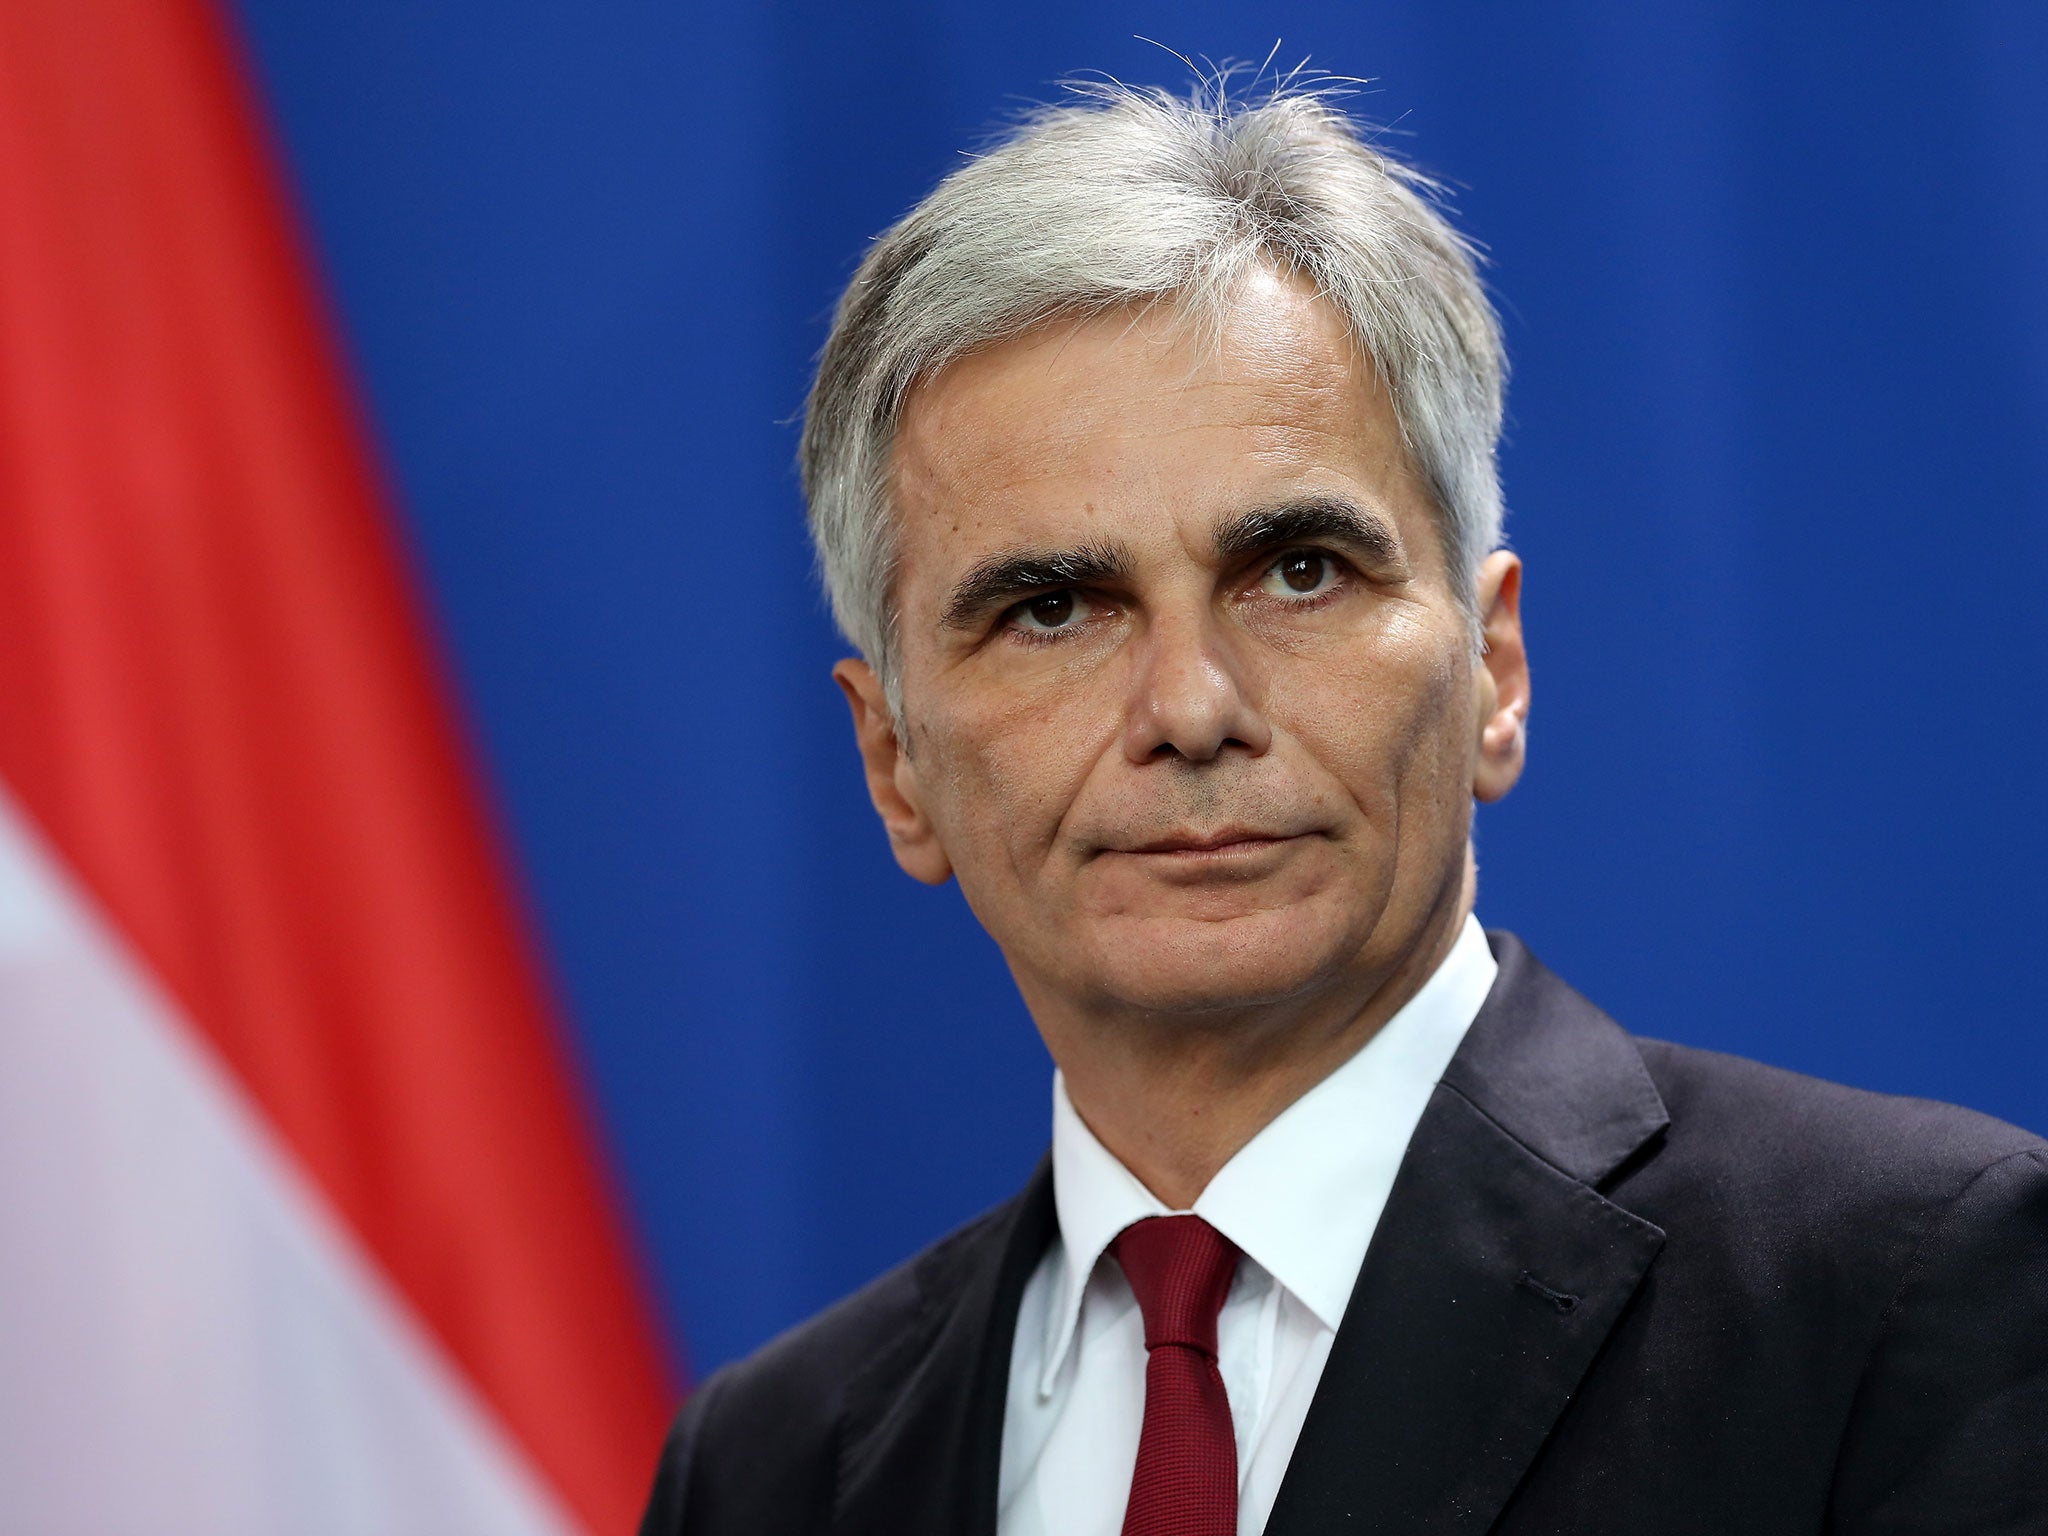 Werner Faymann had been under pressure after his party's poor performance in a presidential election two weeks ago